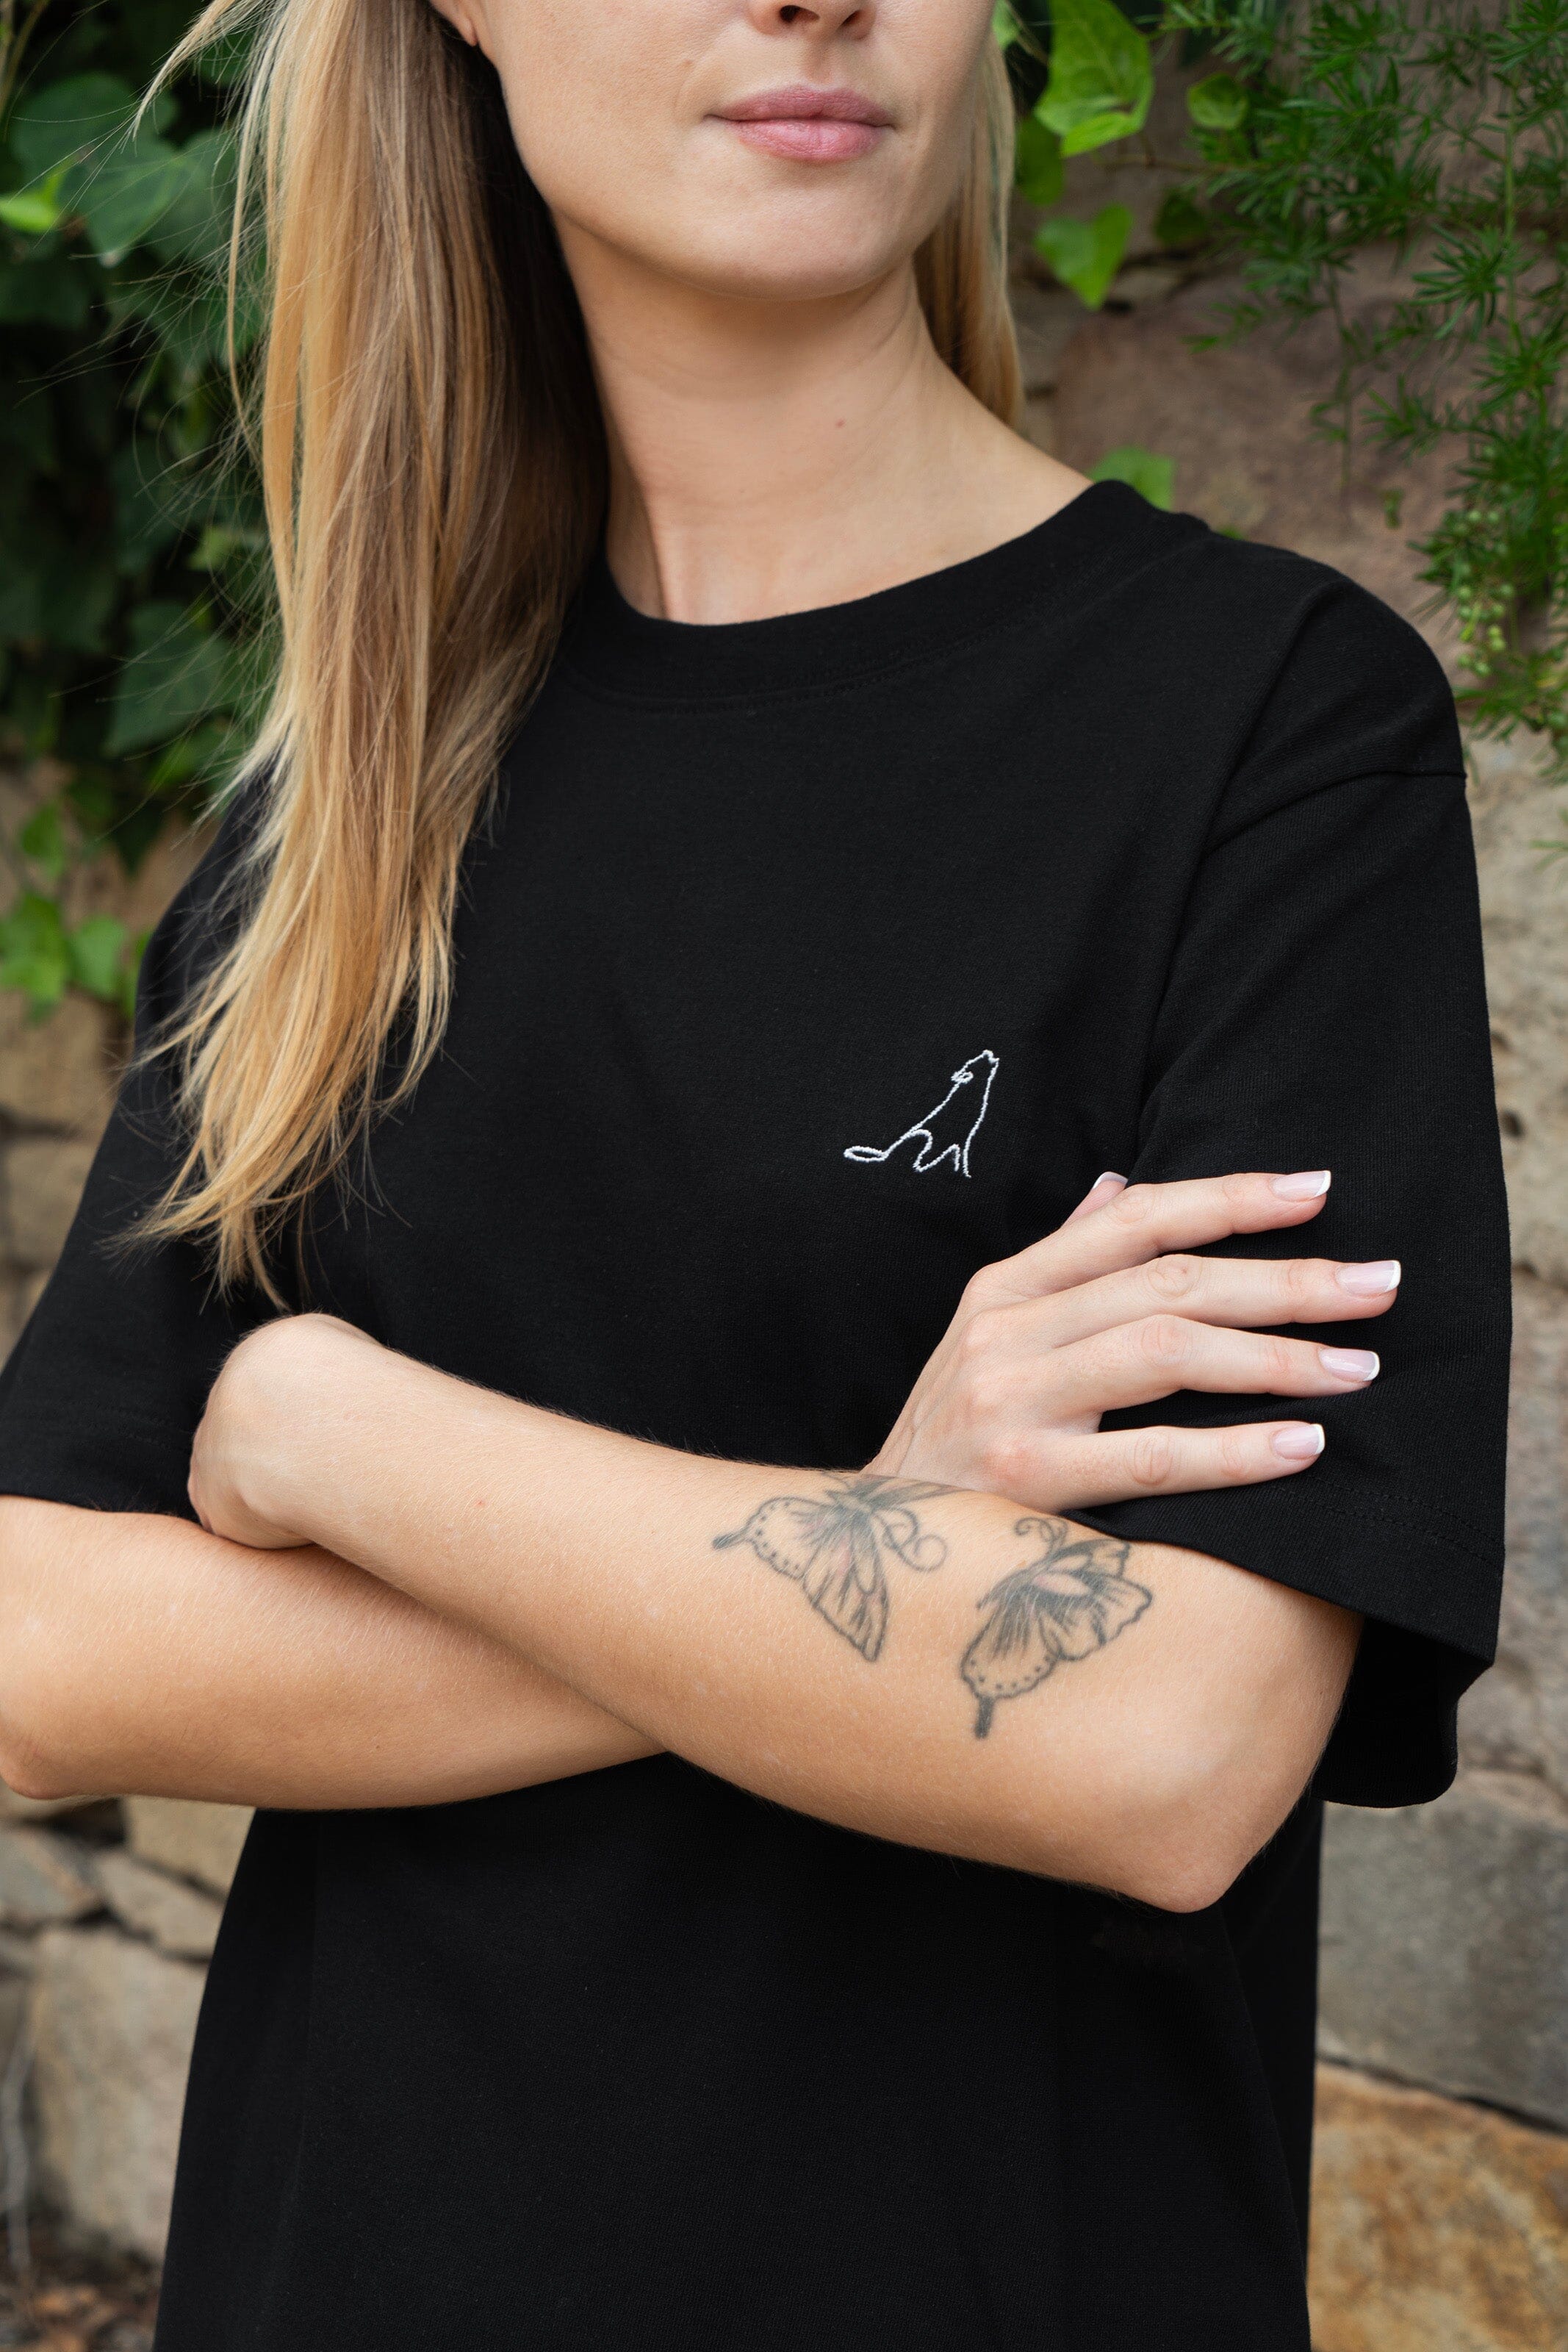 Women's Relaxed T-Shirt | Jungle x Embroidered Wolf